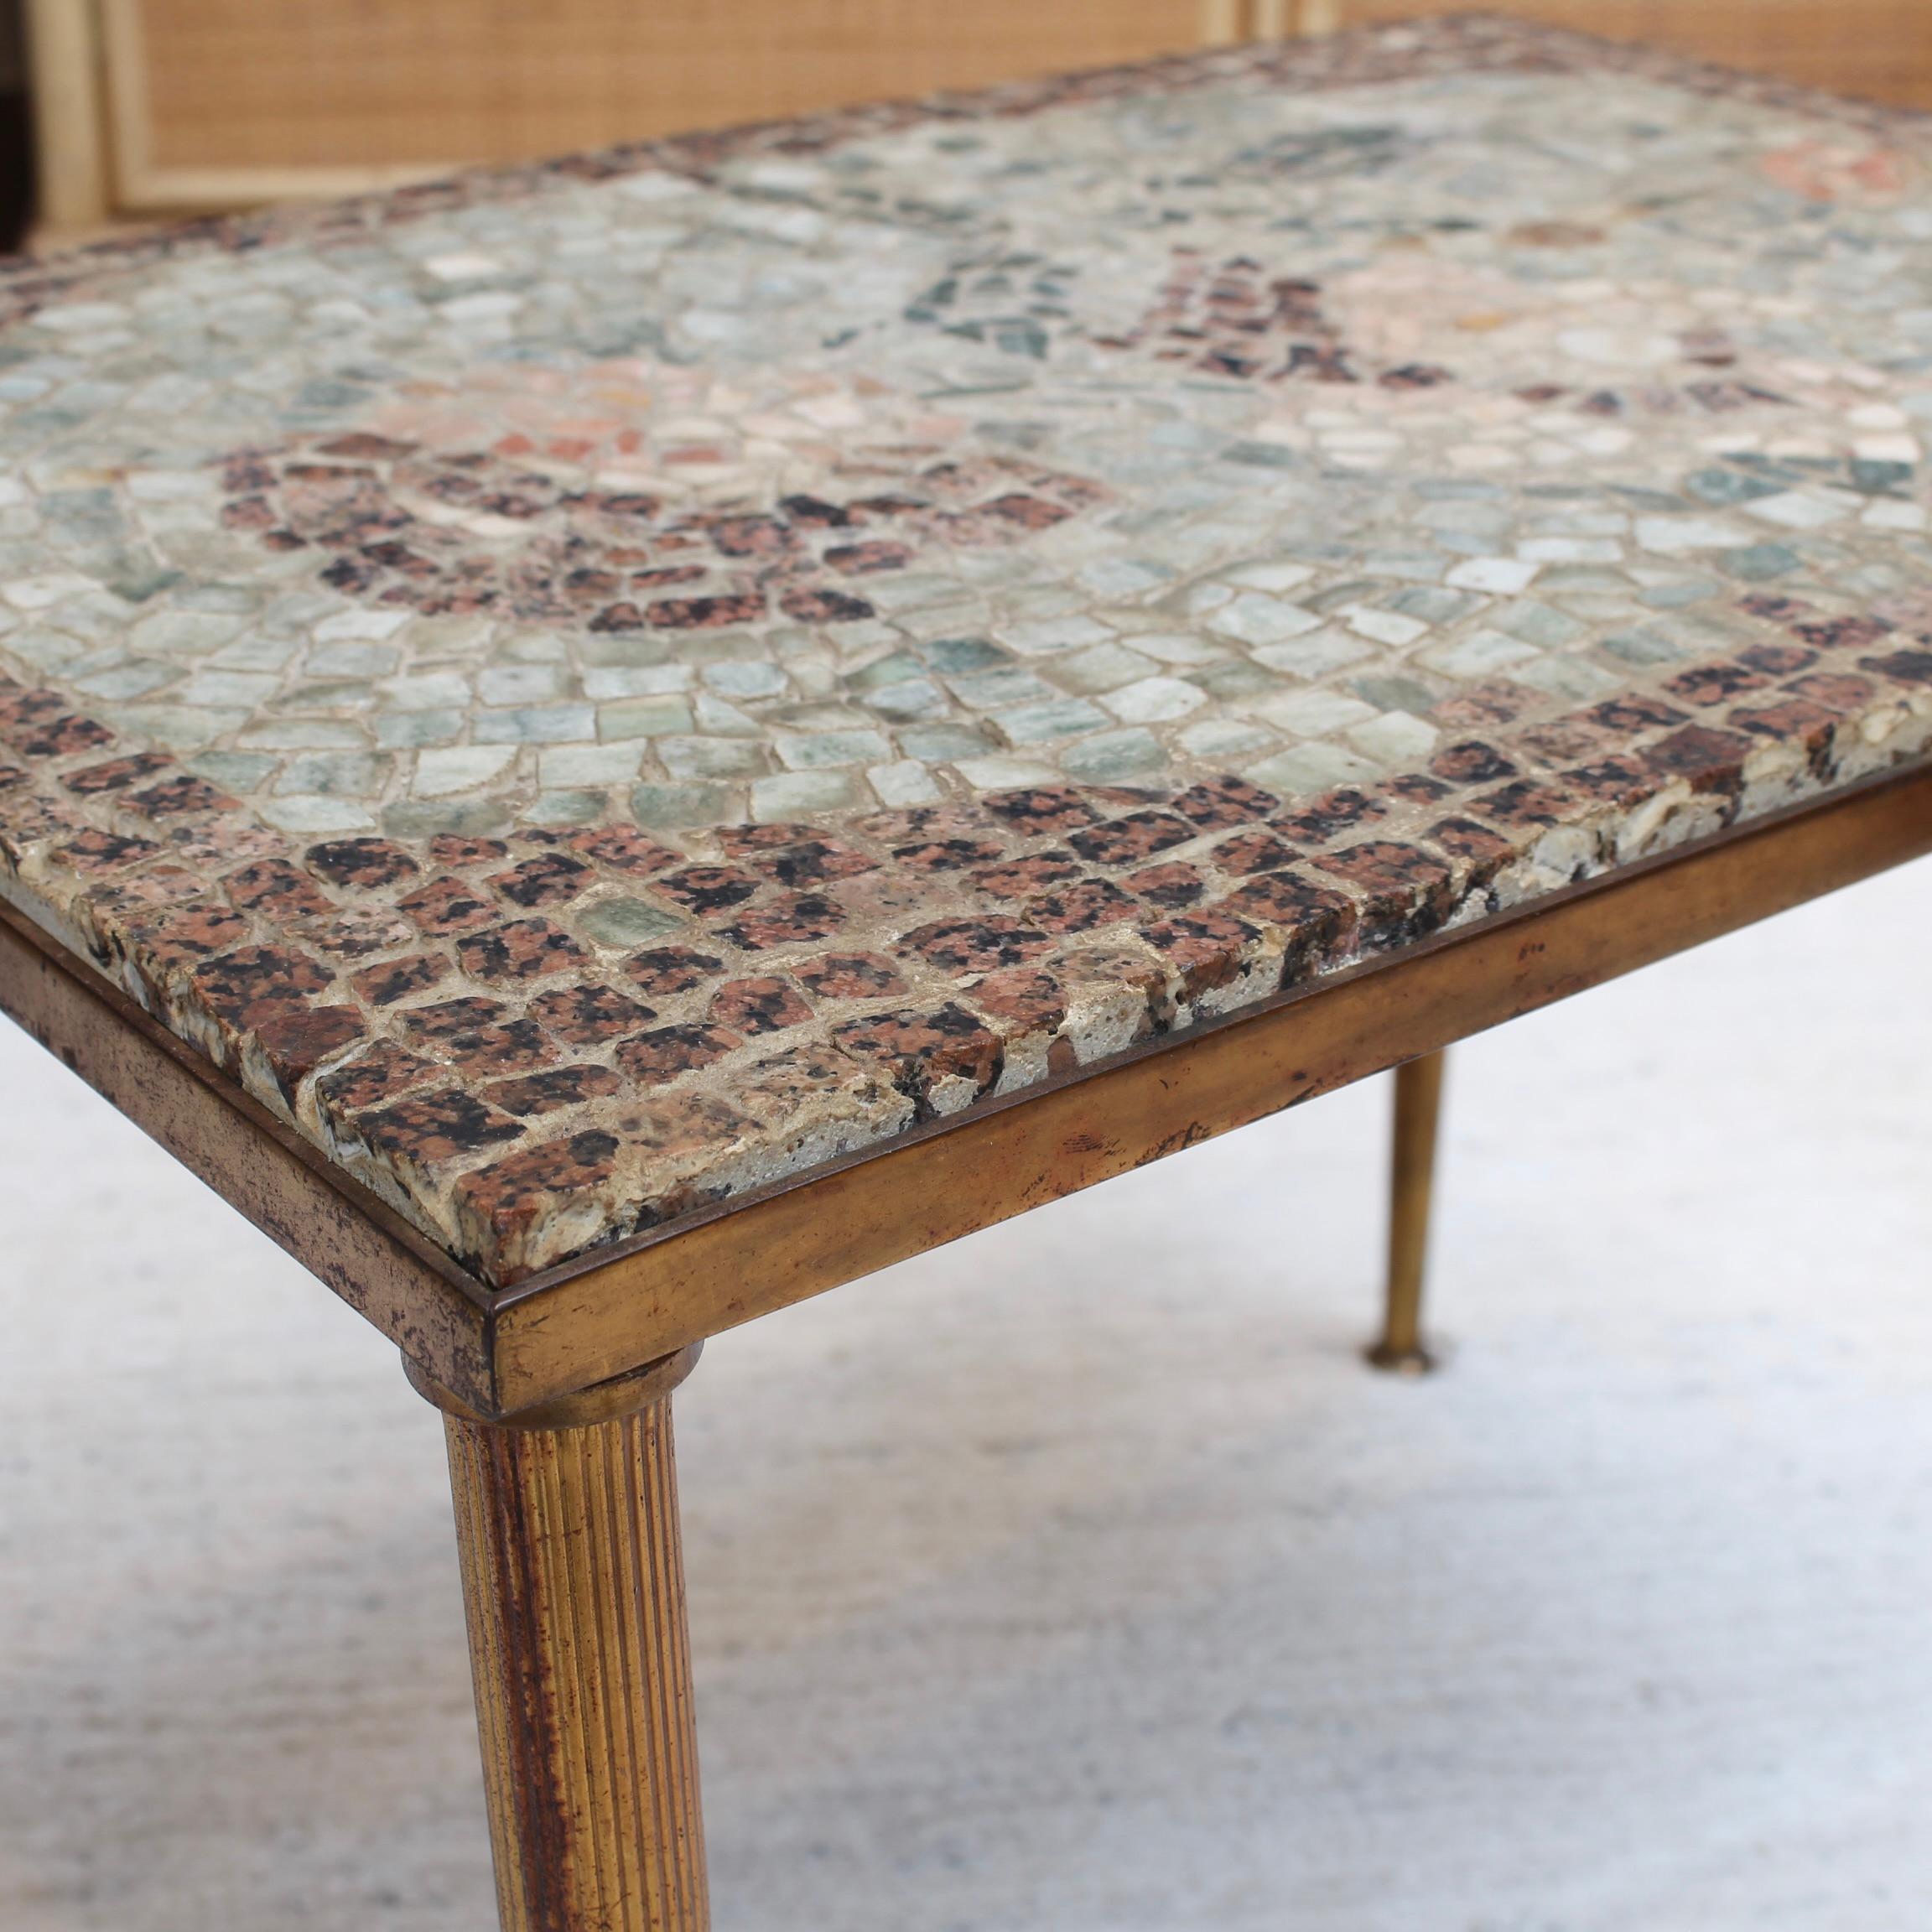 Vintage Low Table with Italian Style Mosaic Top, 'circa 1950s' For Sale 8